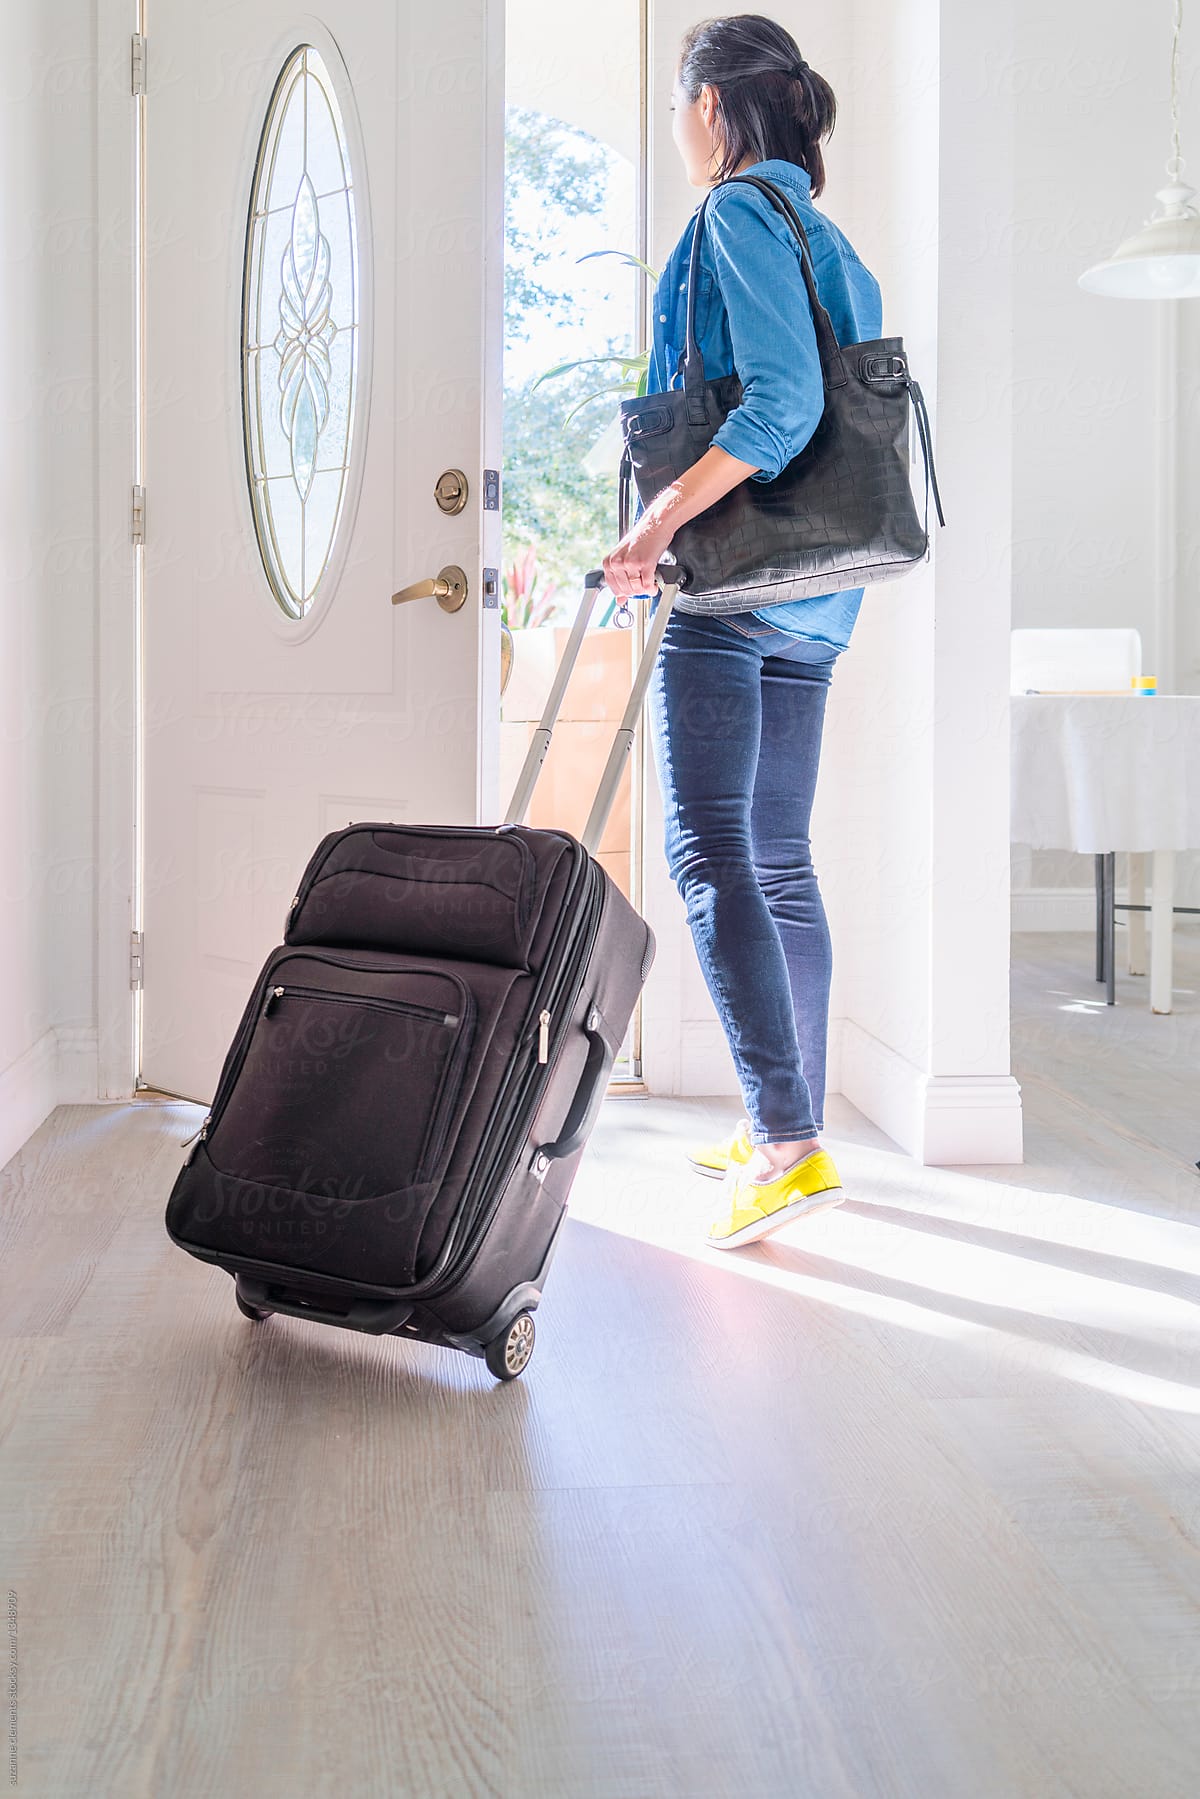 Woman Packs Up Home And Sets Off For A New Destination Del